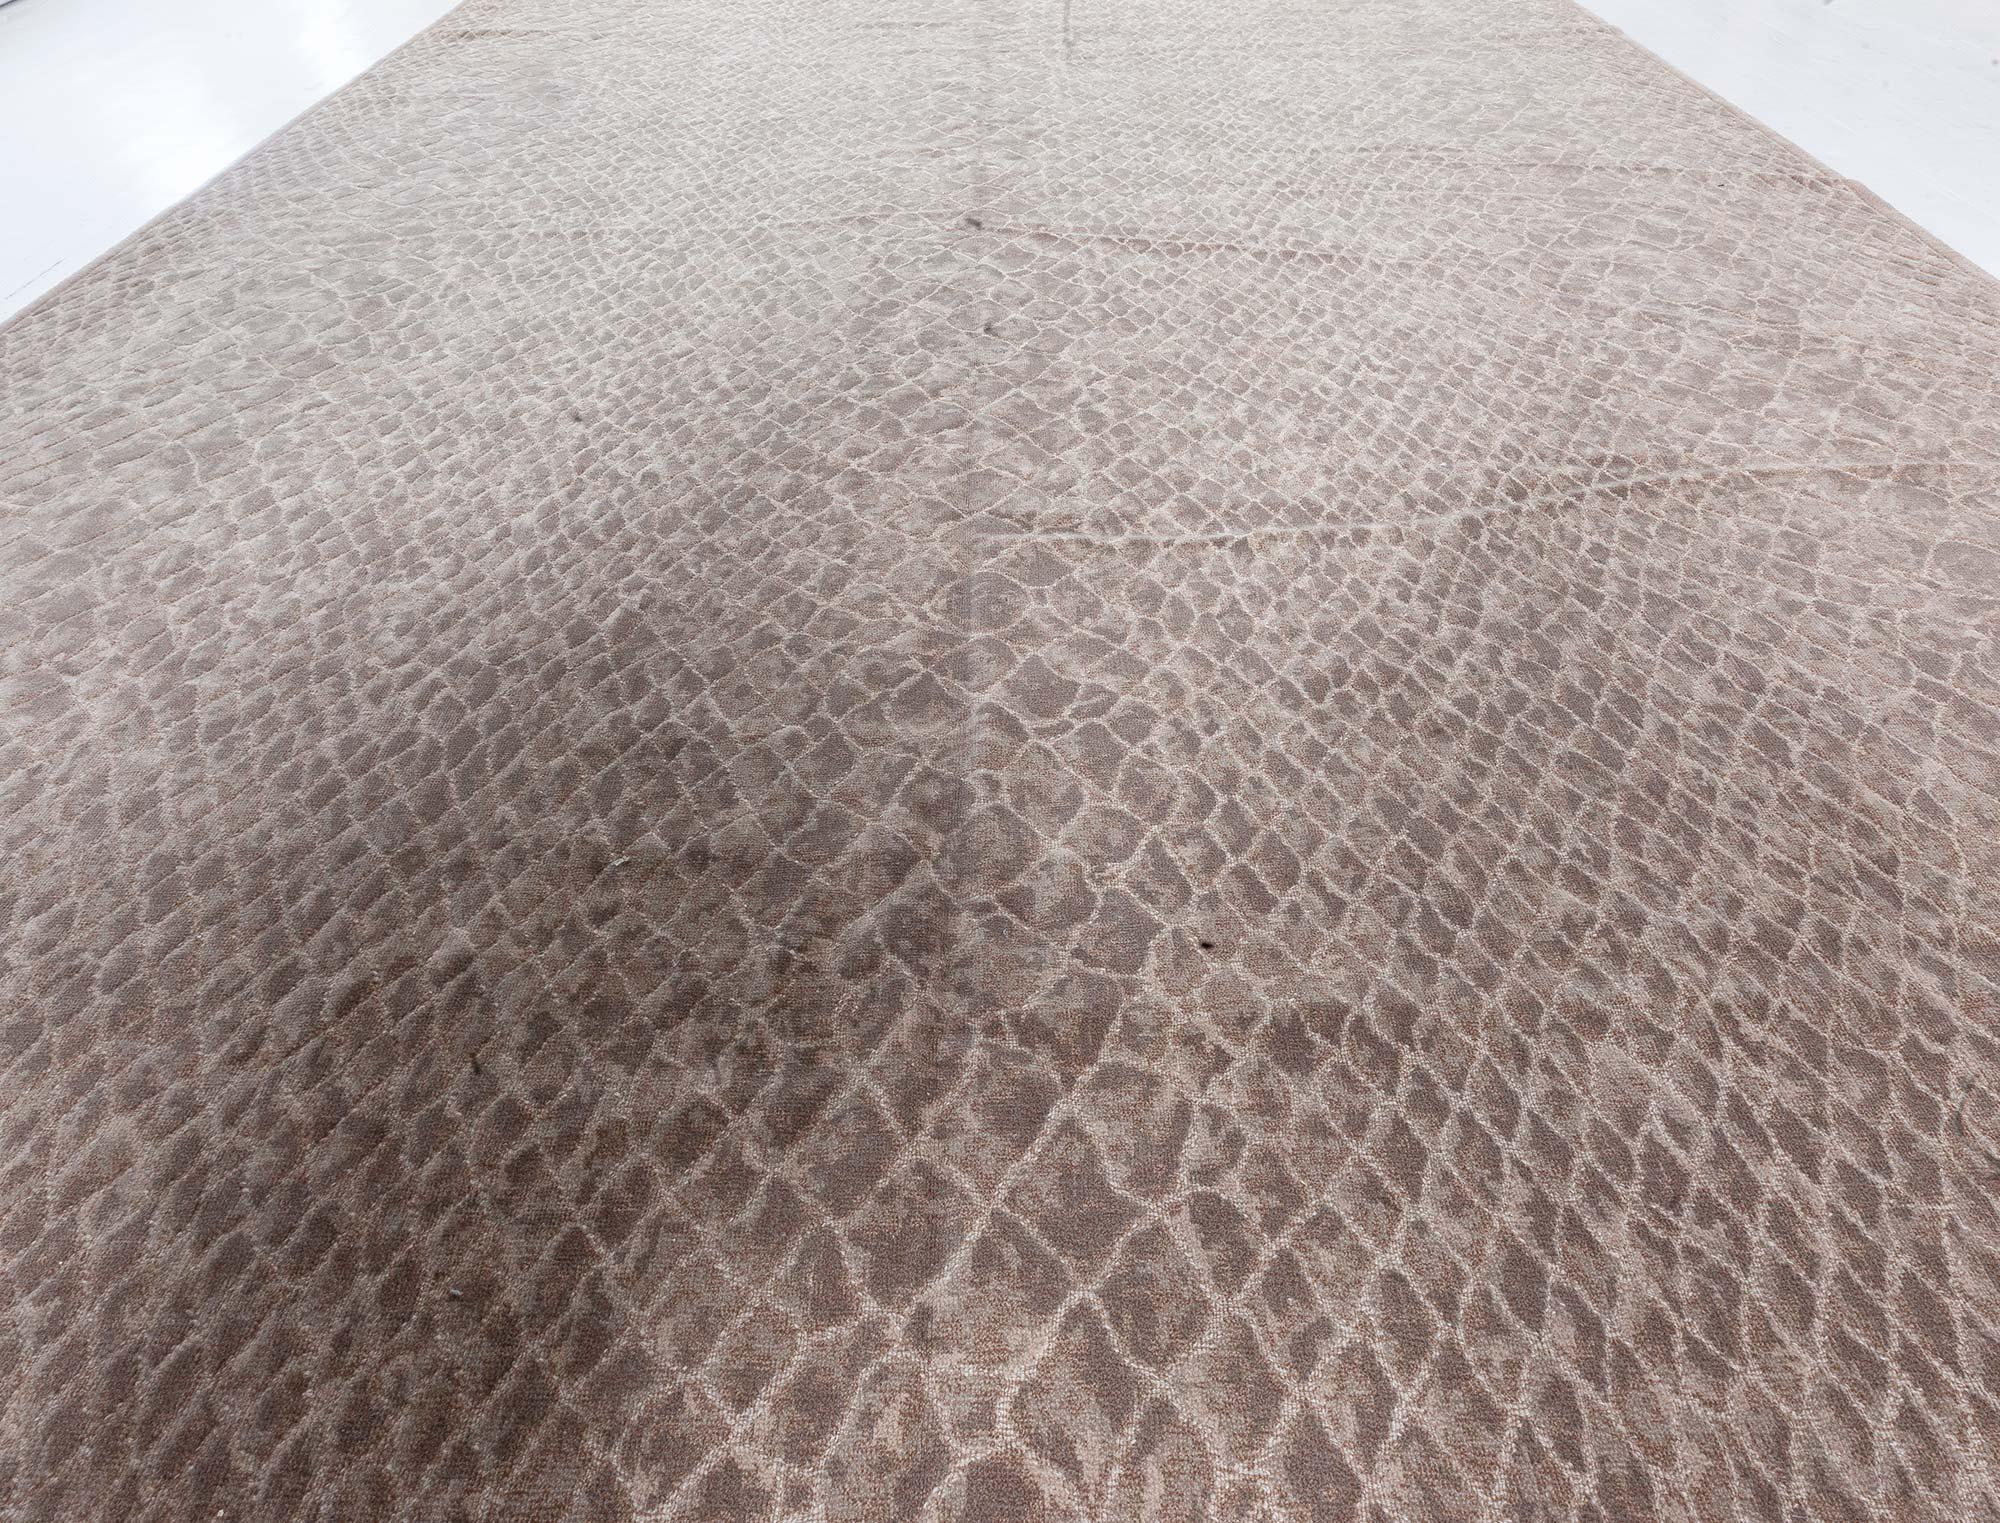 Contemporary Snake Design Handmade Wool Rug by Doris Leslie Blau In New Condition For Sale In New York, NY